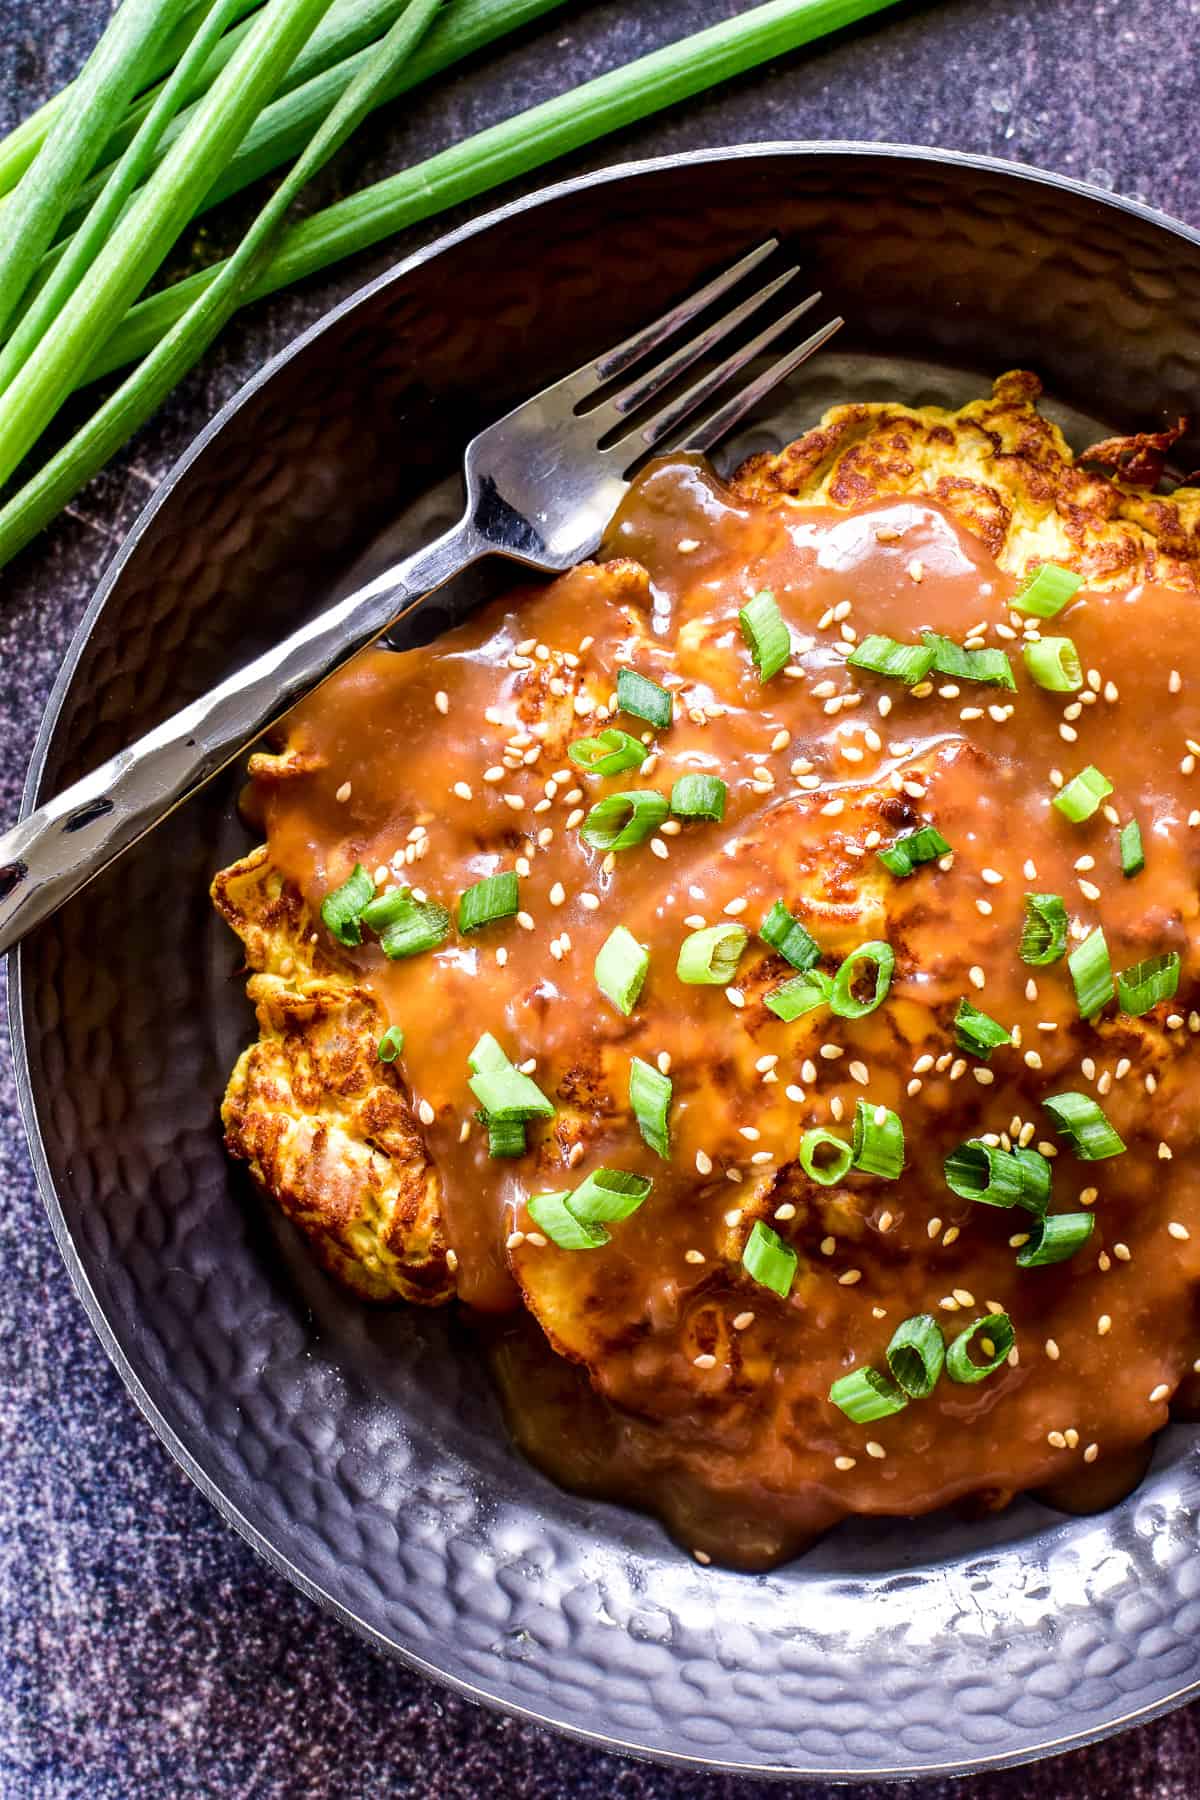 Overhead shot of Egg Foo Young with slicee green onions and sesame seeds